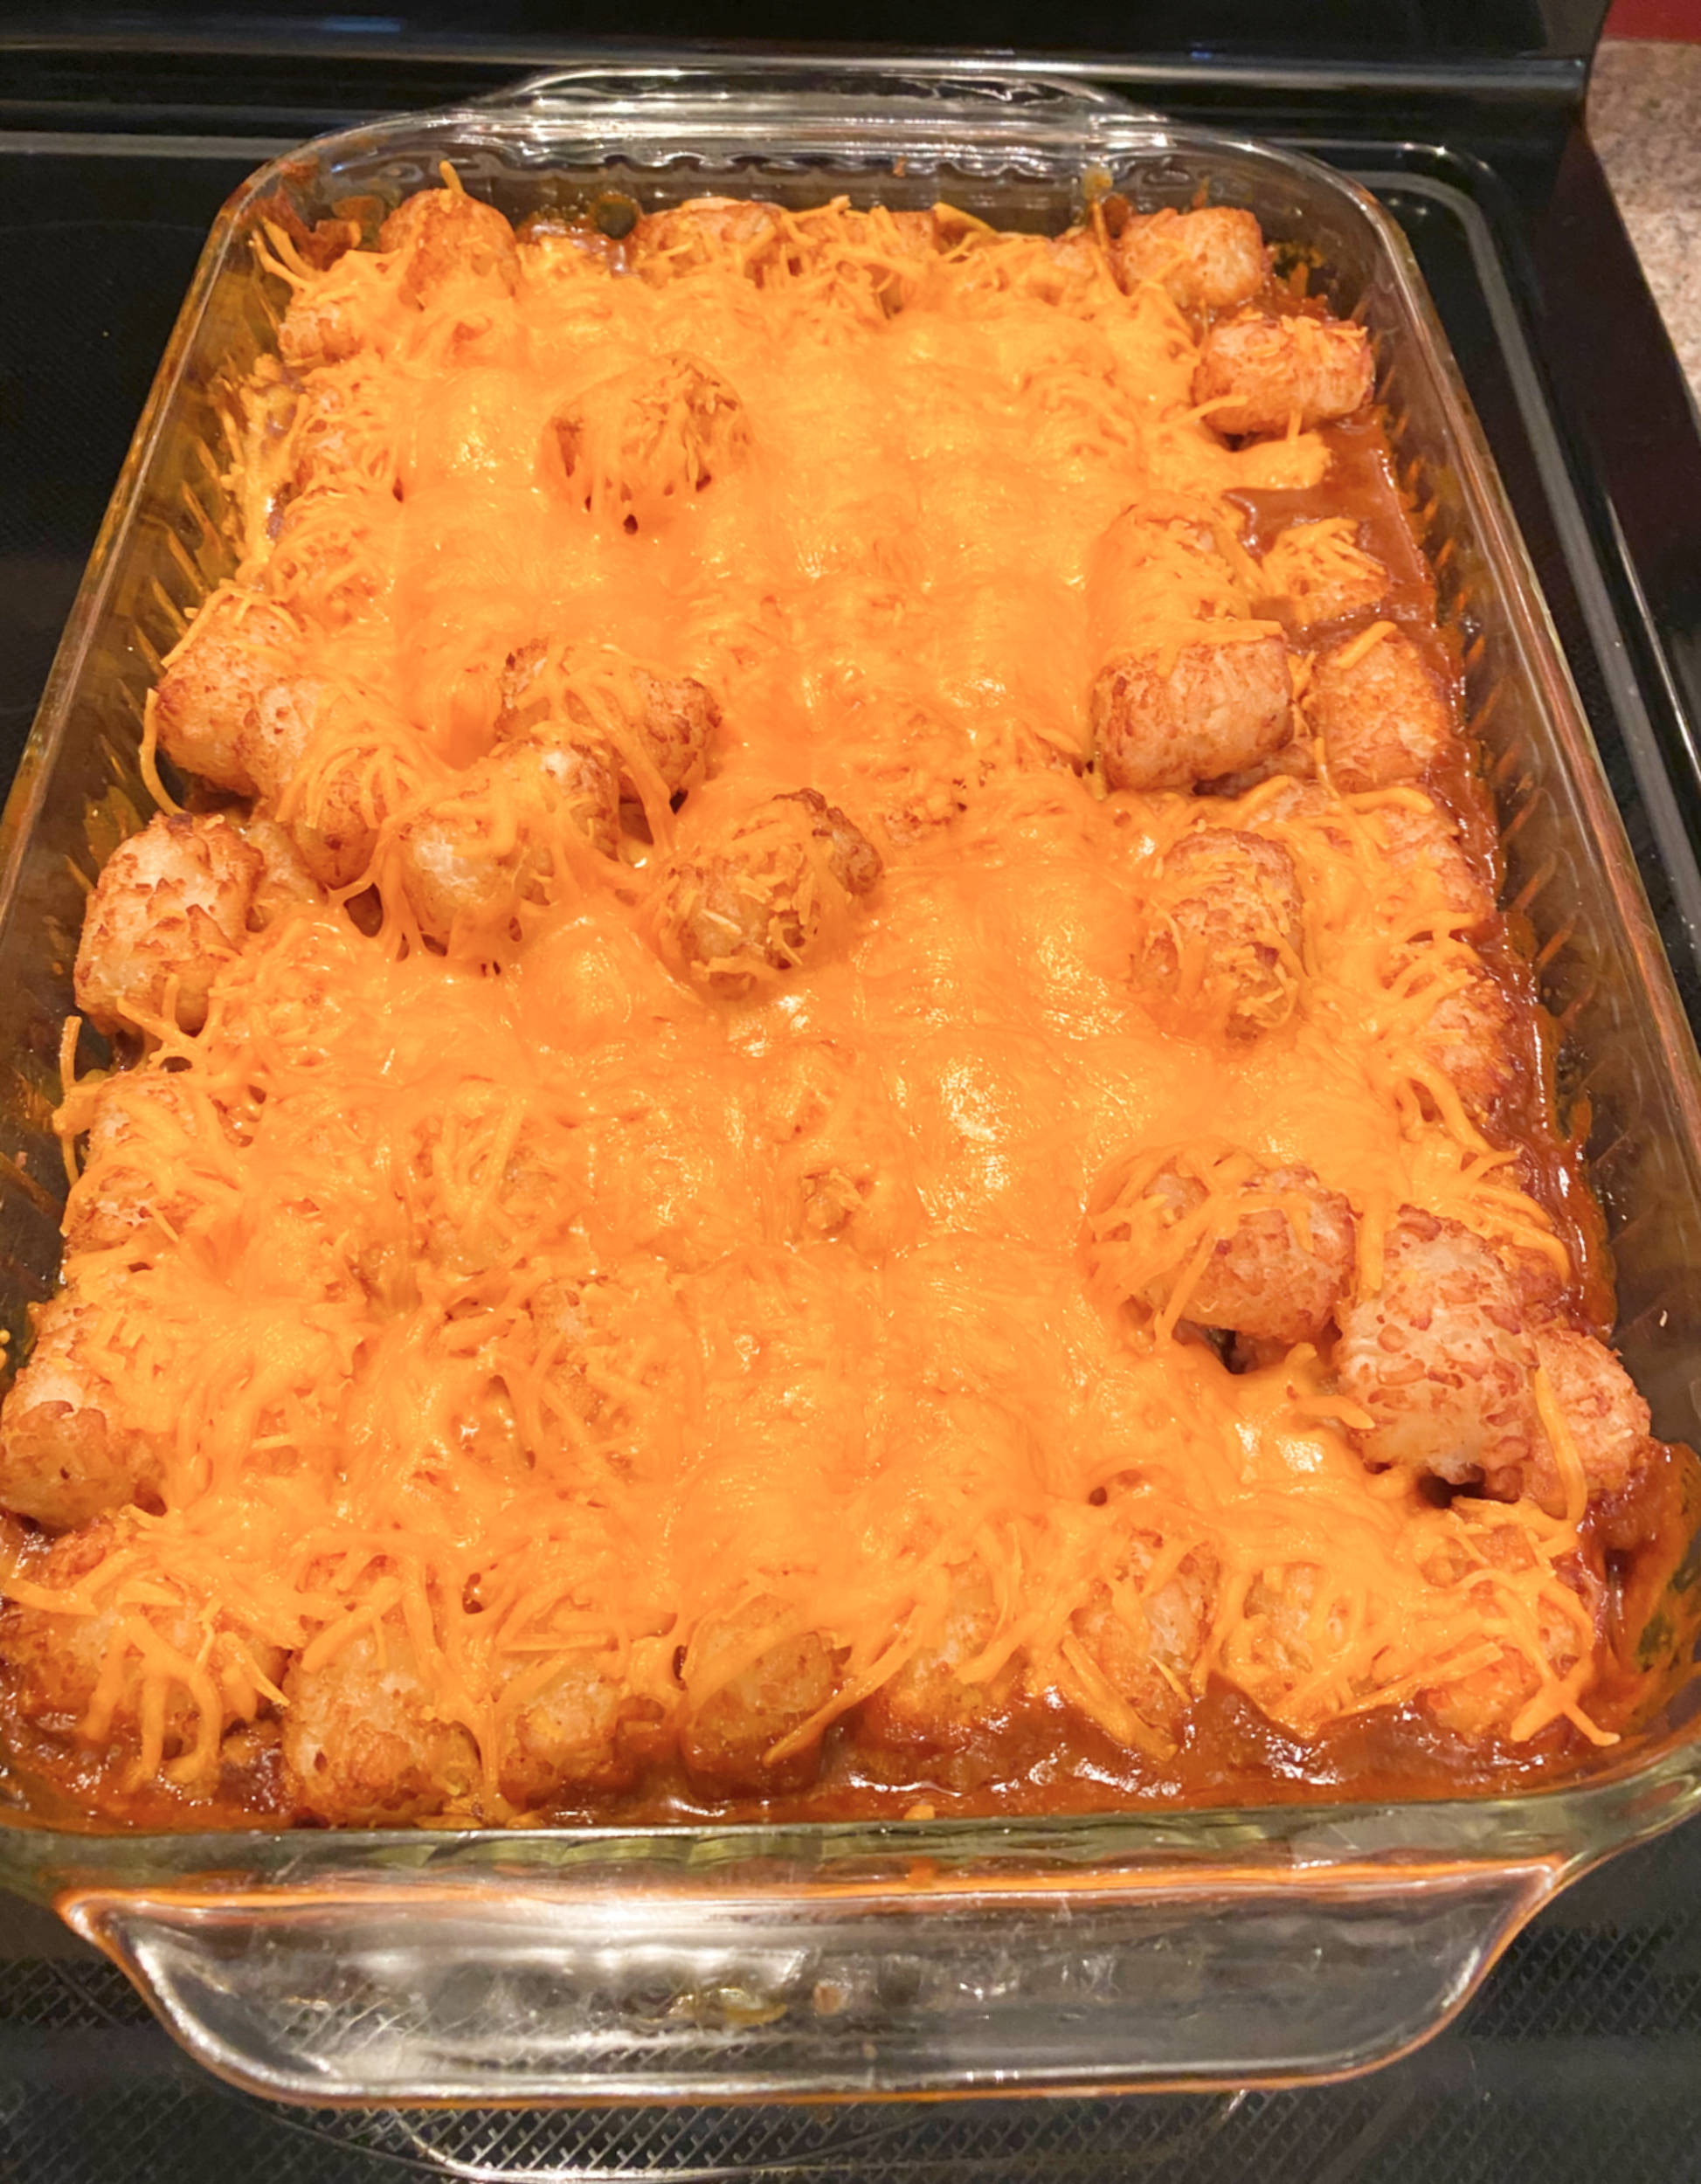 tater tot casserole recipes with hot dogs